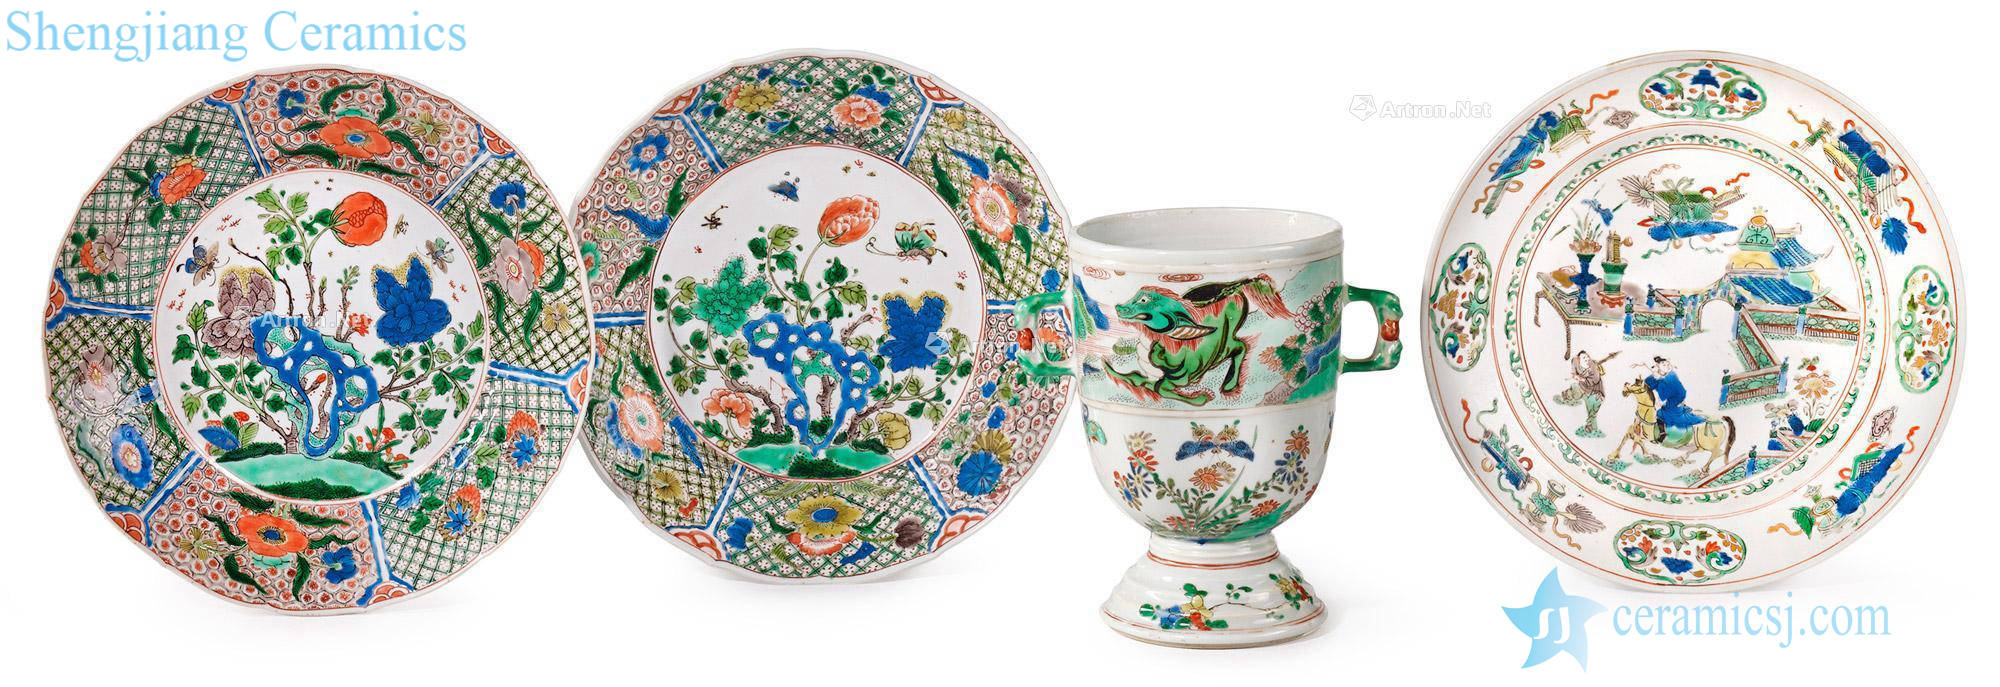 The qing emperor kangxi Colorful benevolent grain ear cup and colorful plate (a set of four)